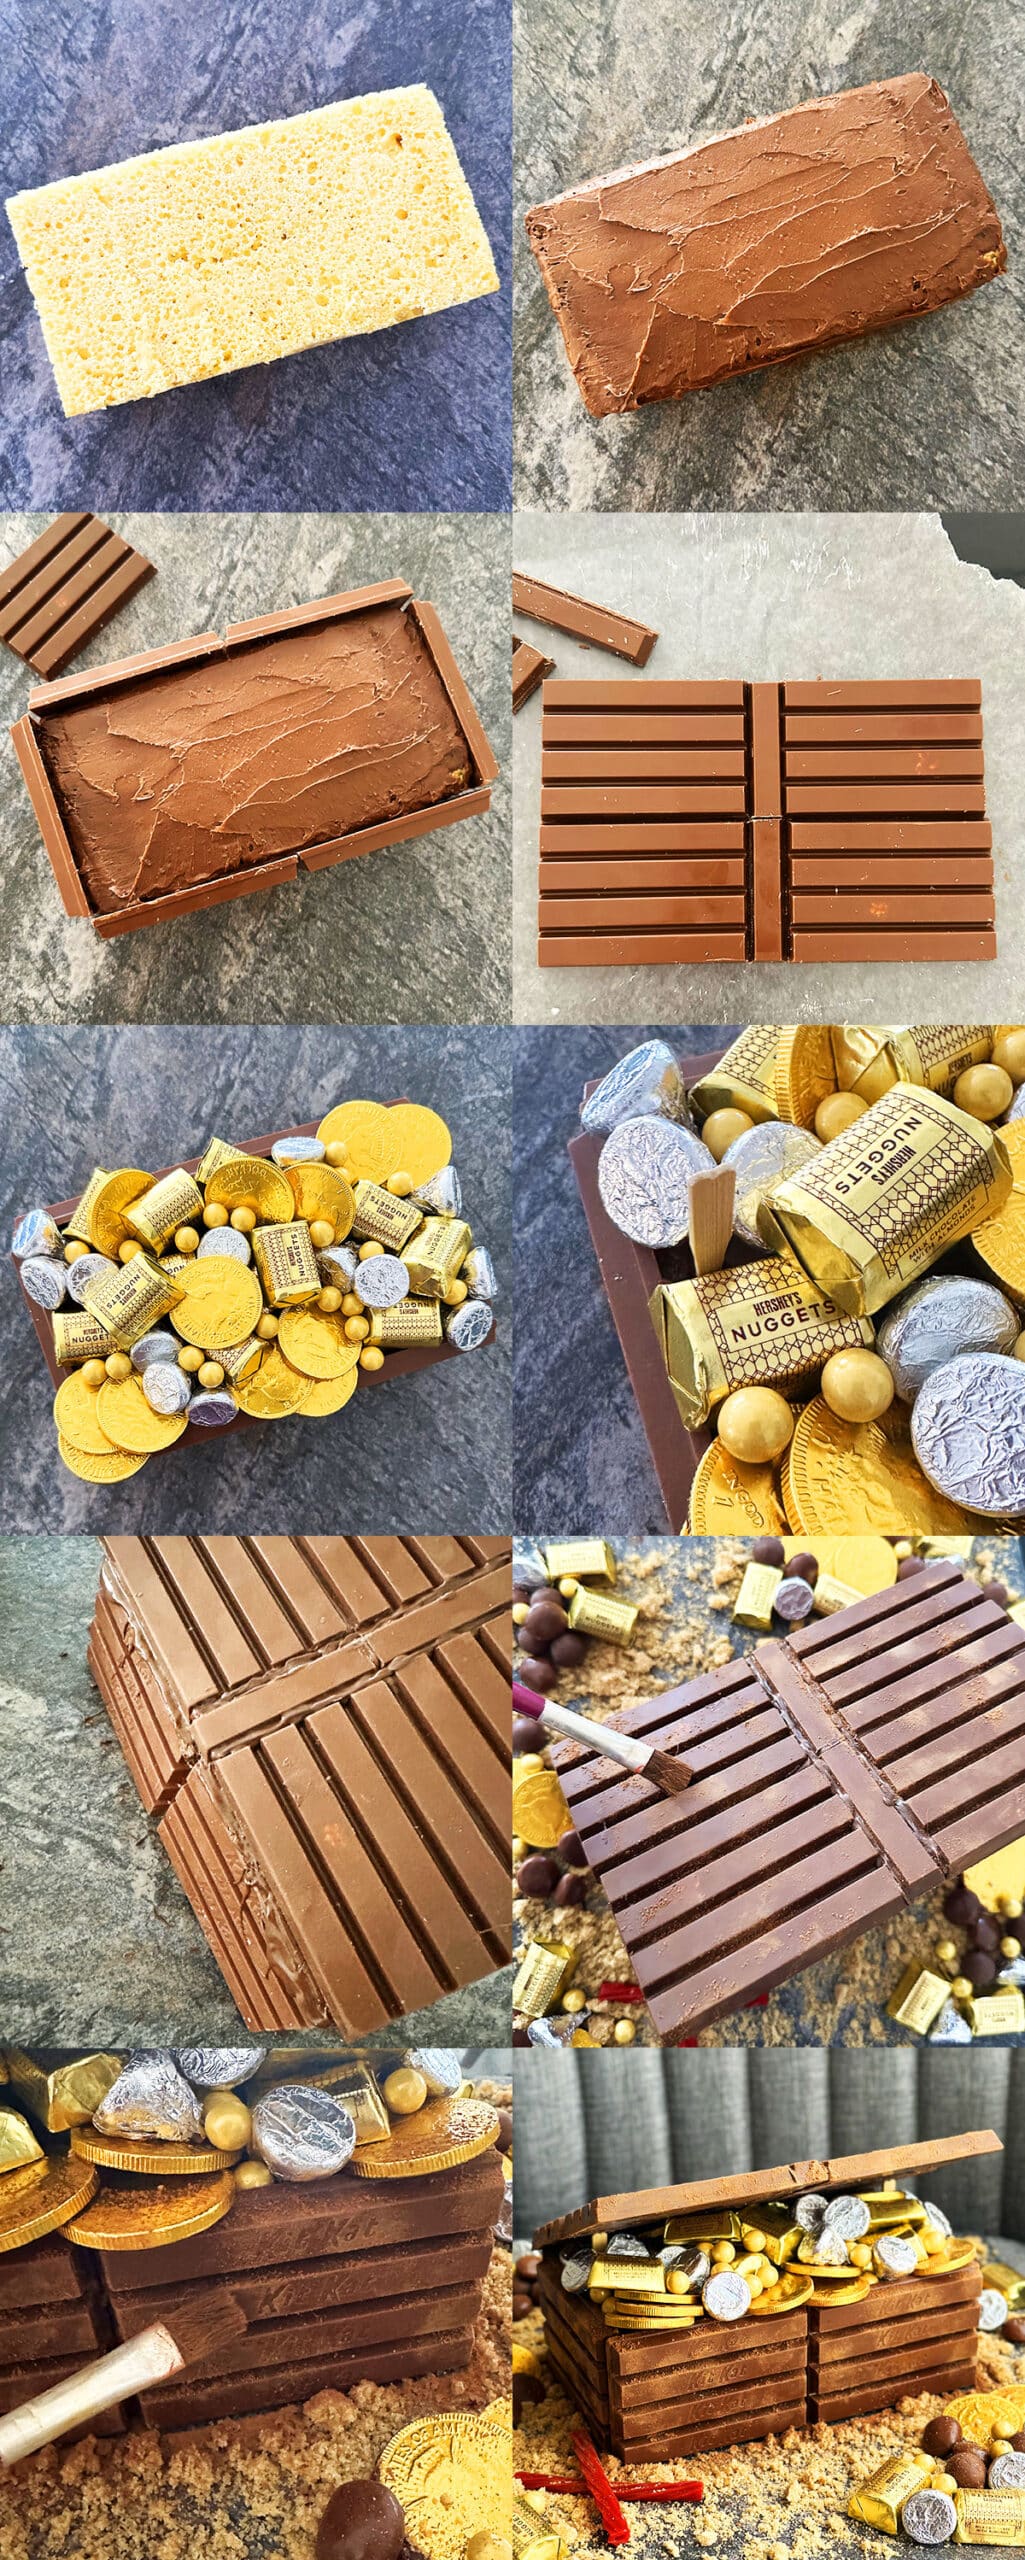 Collage Image With Step by Step Pictures on How to Make Pirate Treasure Chest Cake With Kit Kat